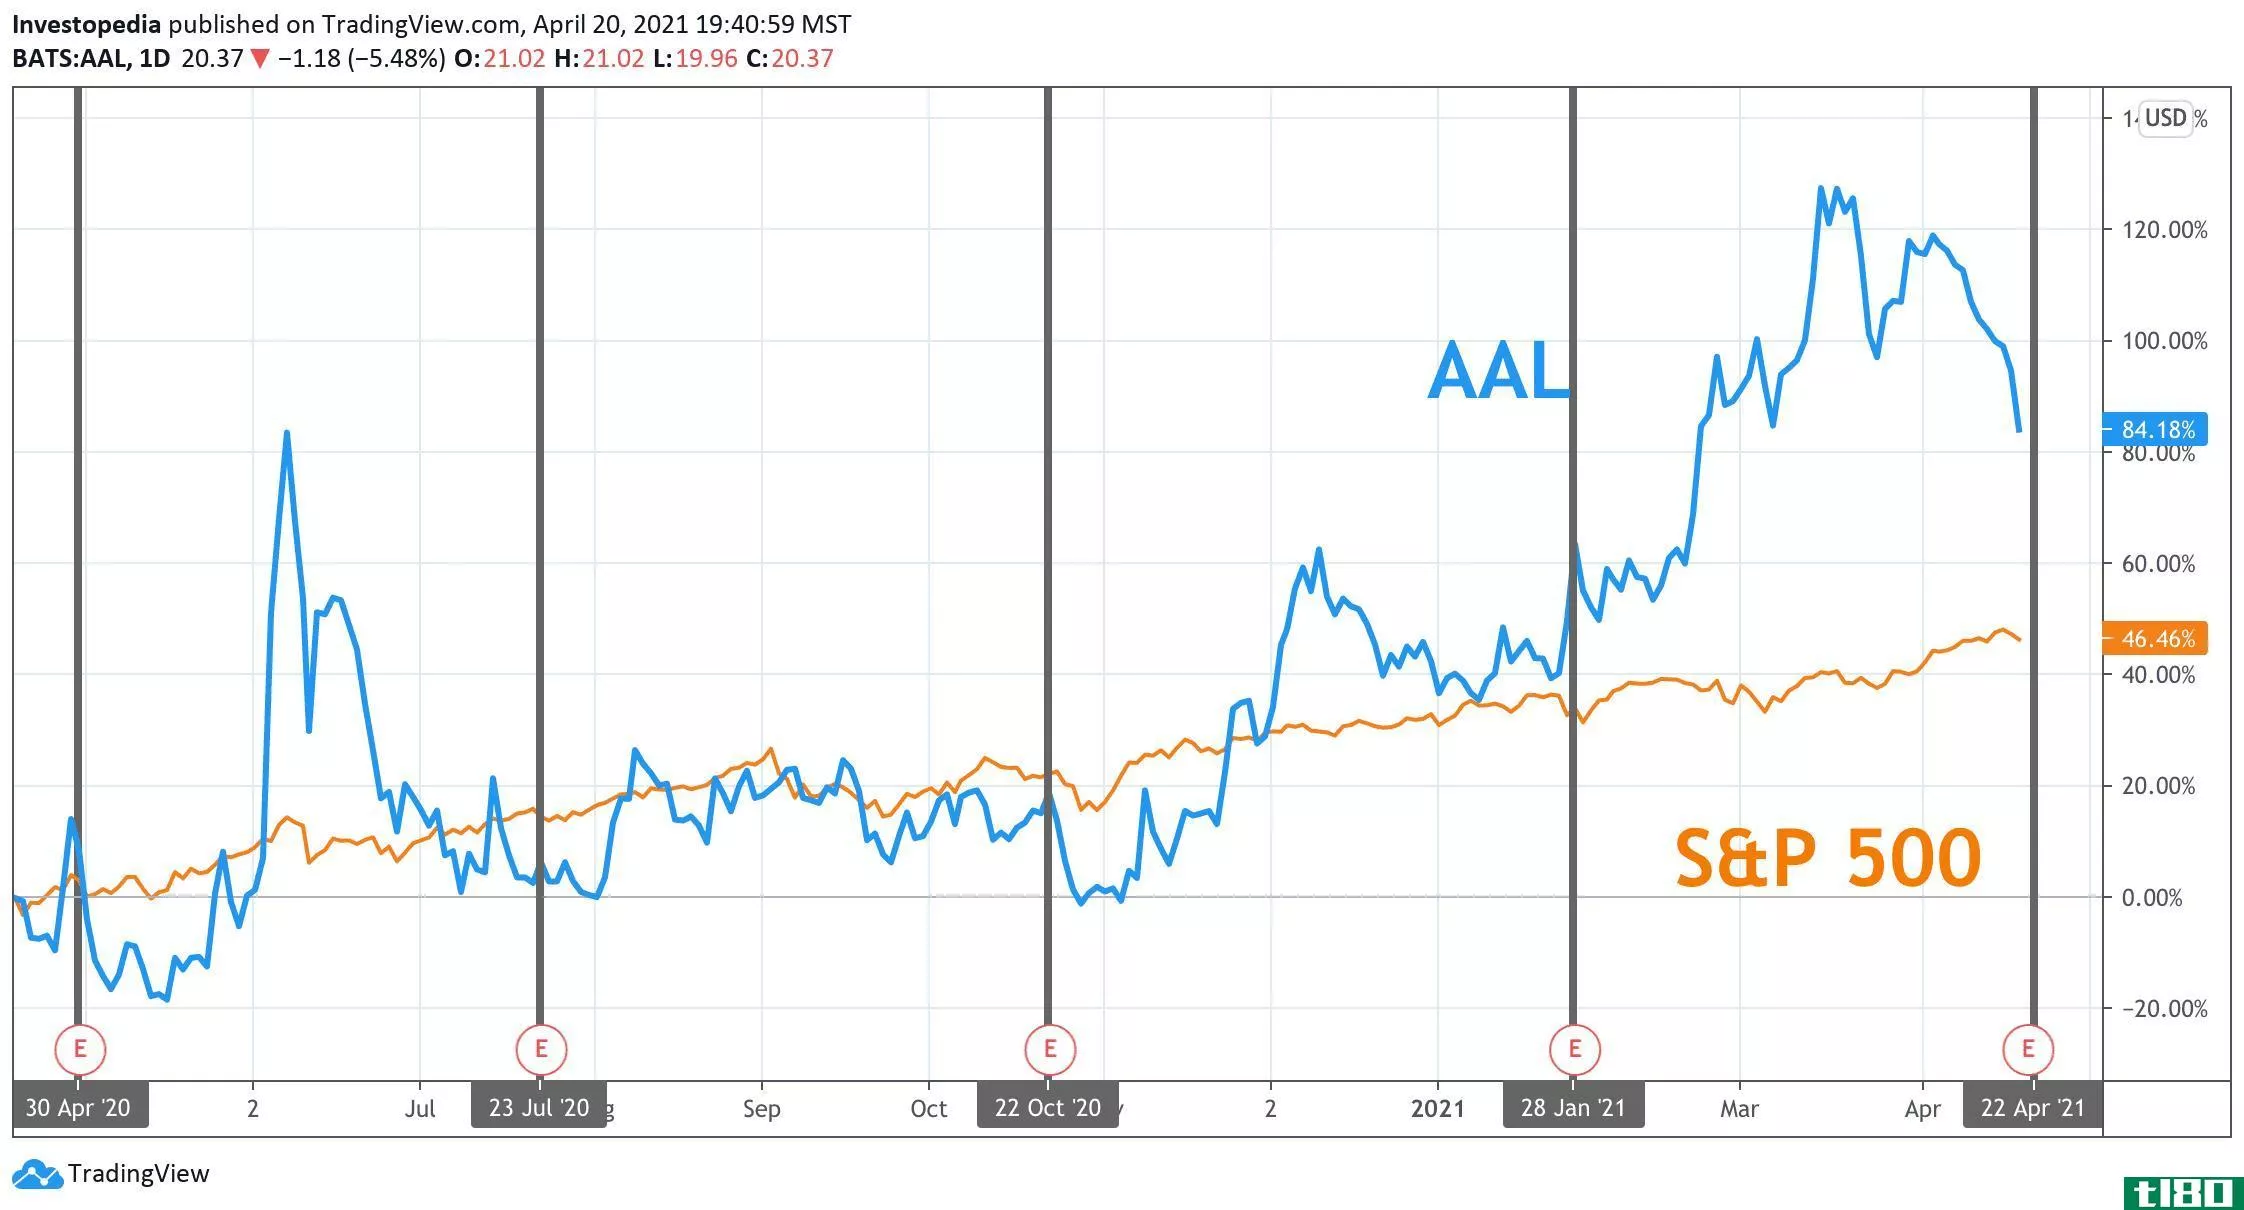 One Year Total Return for S&P 500 and American Airlines